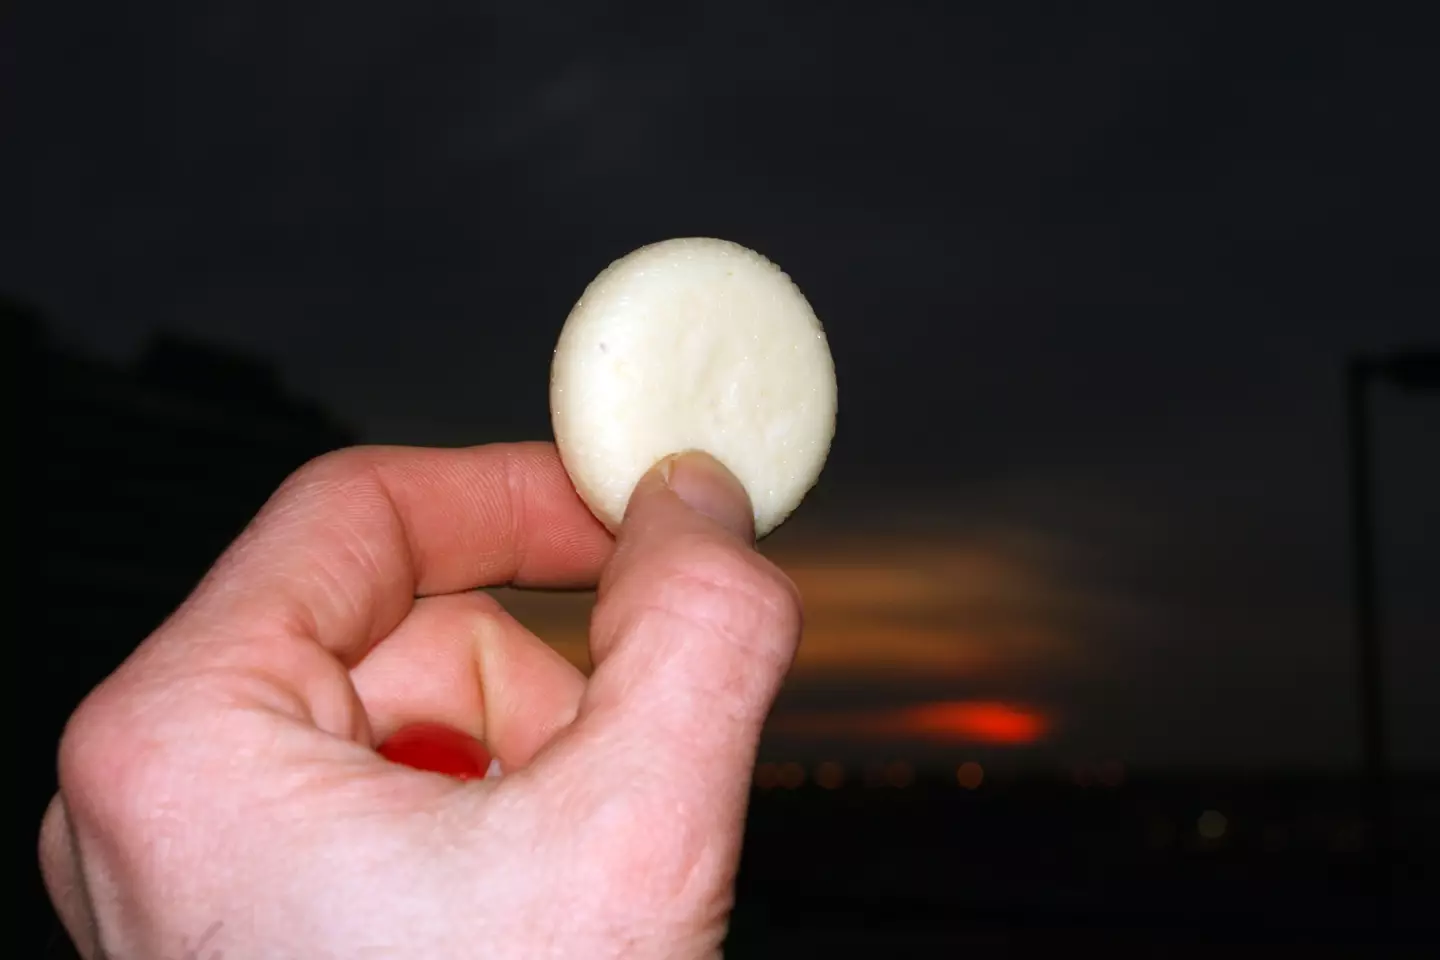 If you didn't know already, you're meant to remove the red wax from your Babybel.